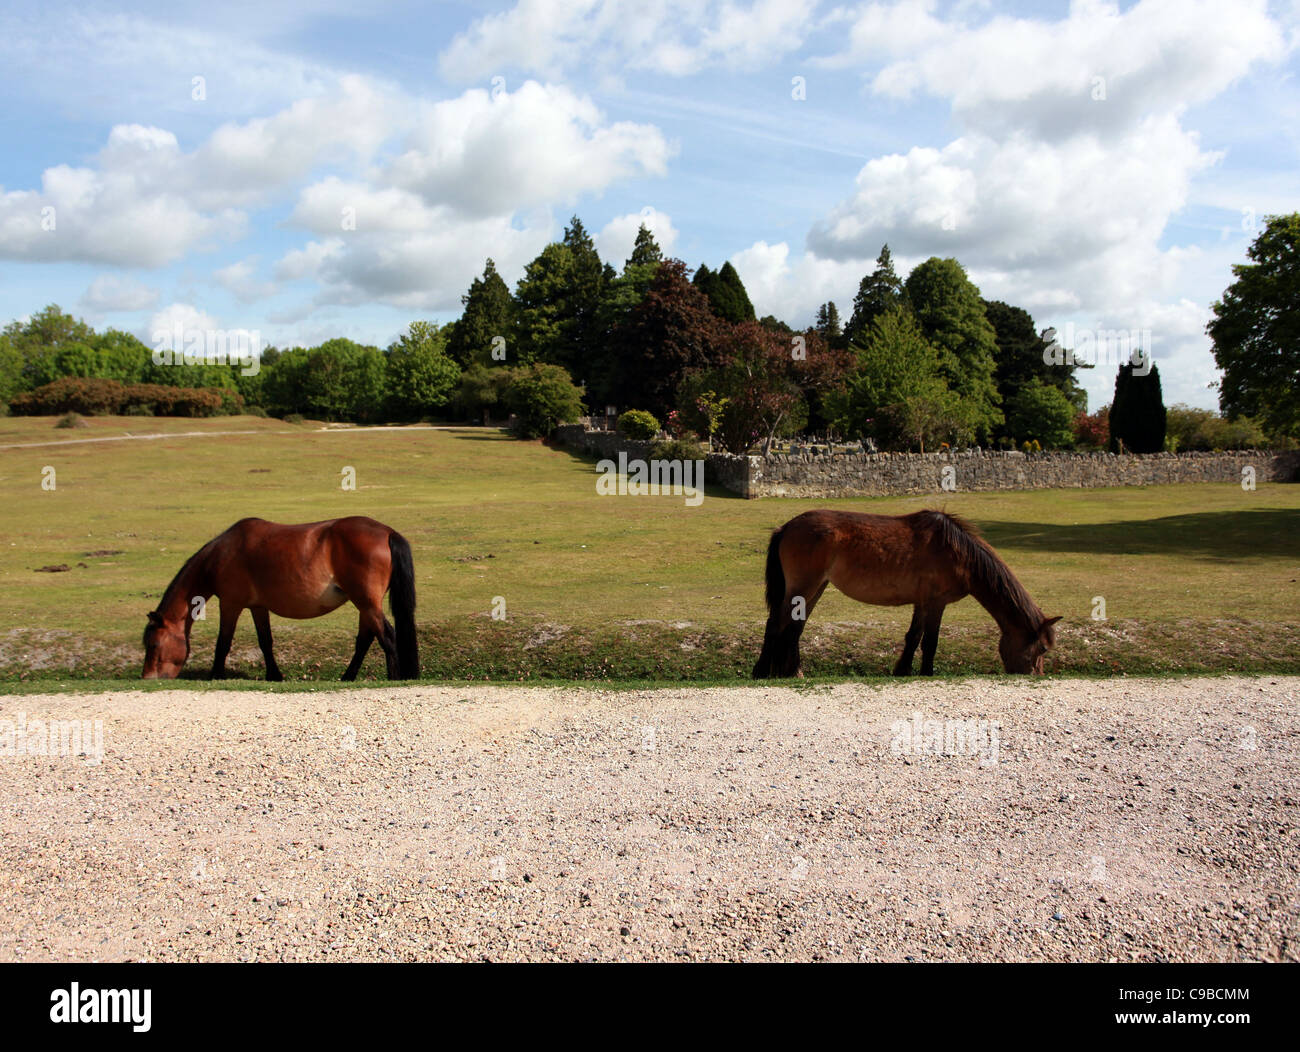 Horses and foals pictured grazing the grass in the New Forest National Park near Lyndhurst, Dorset, England, United Kingdom. Stock Photo